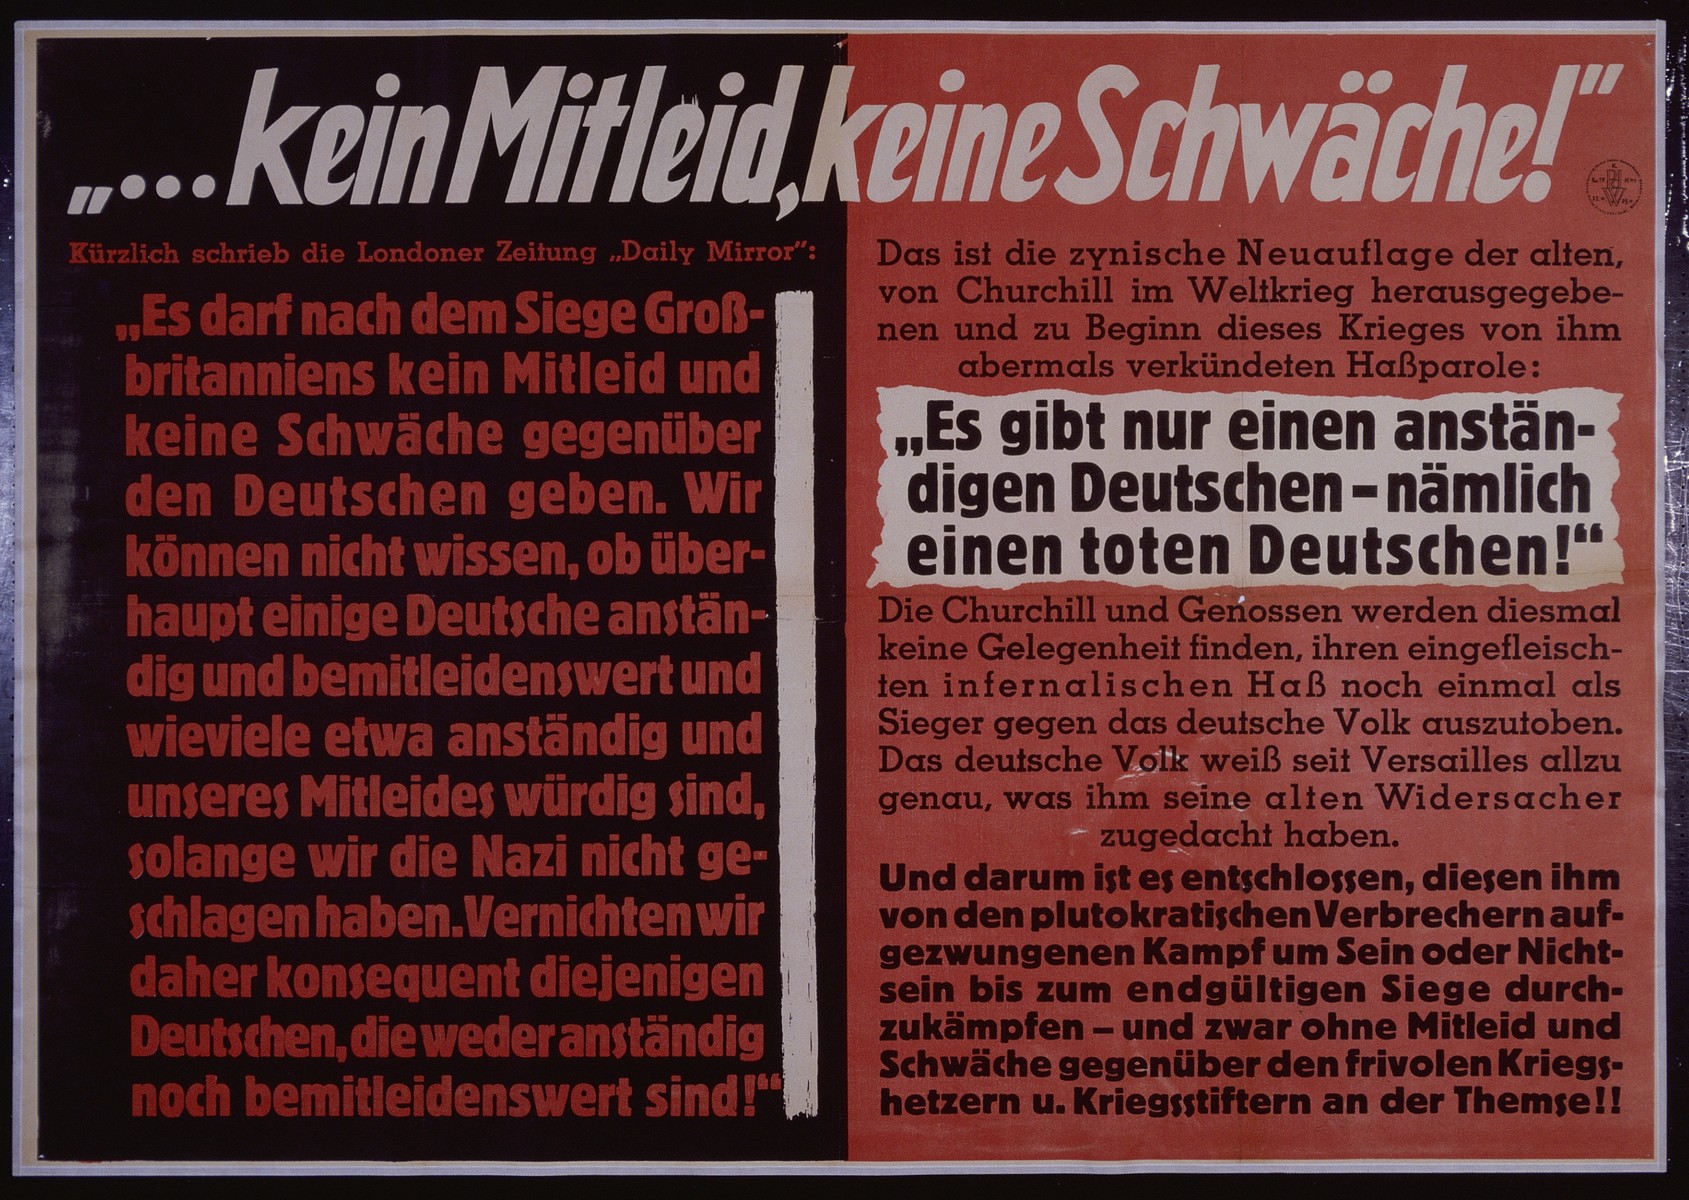 Nazi propaganda poster entitled, "...kein Mitleid, keine Schwache," issued by the "Parole der Woche," a wall newspaper (Wandzeitung) published by the National Socialist Party propaganda office in Munich.